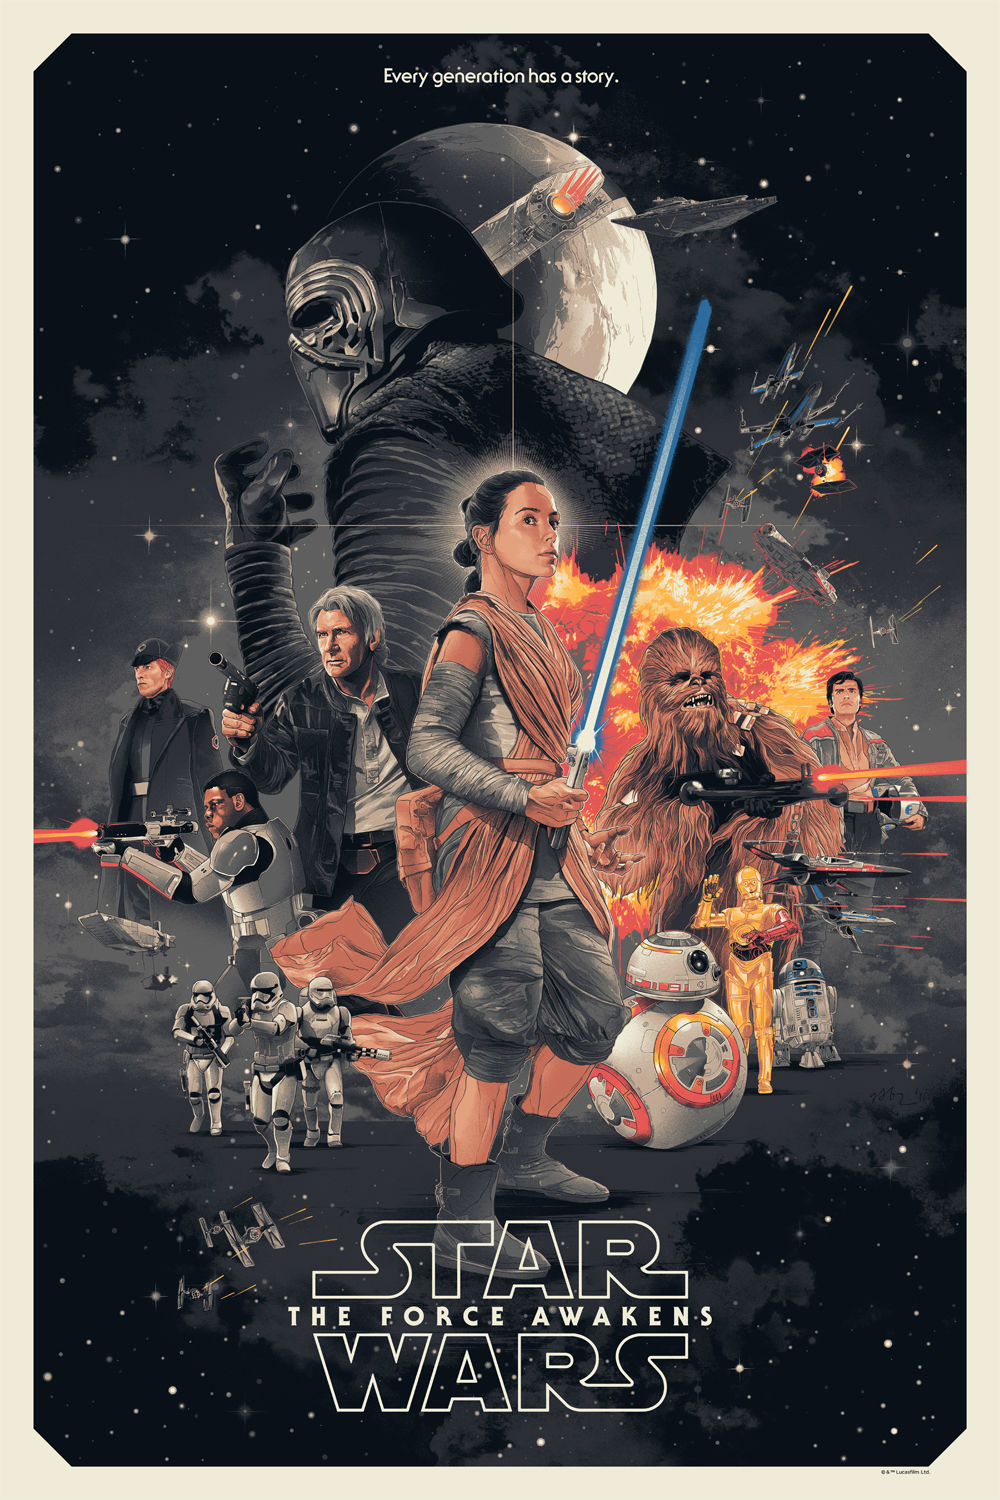 You Thought You Were Done Buying Force Awakens Stuff? Think Again